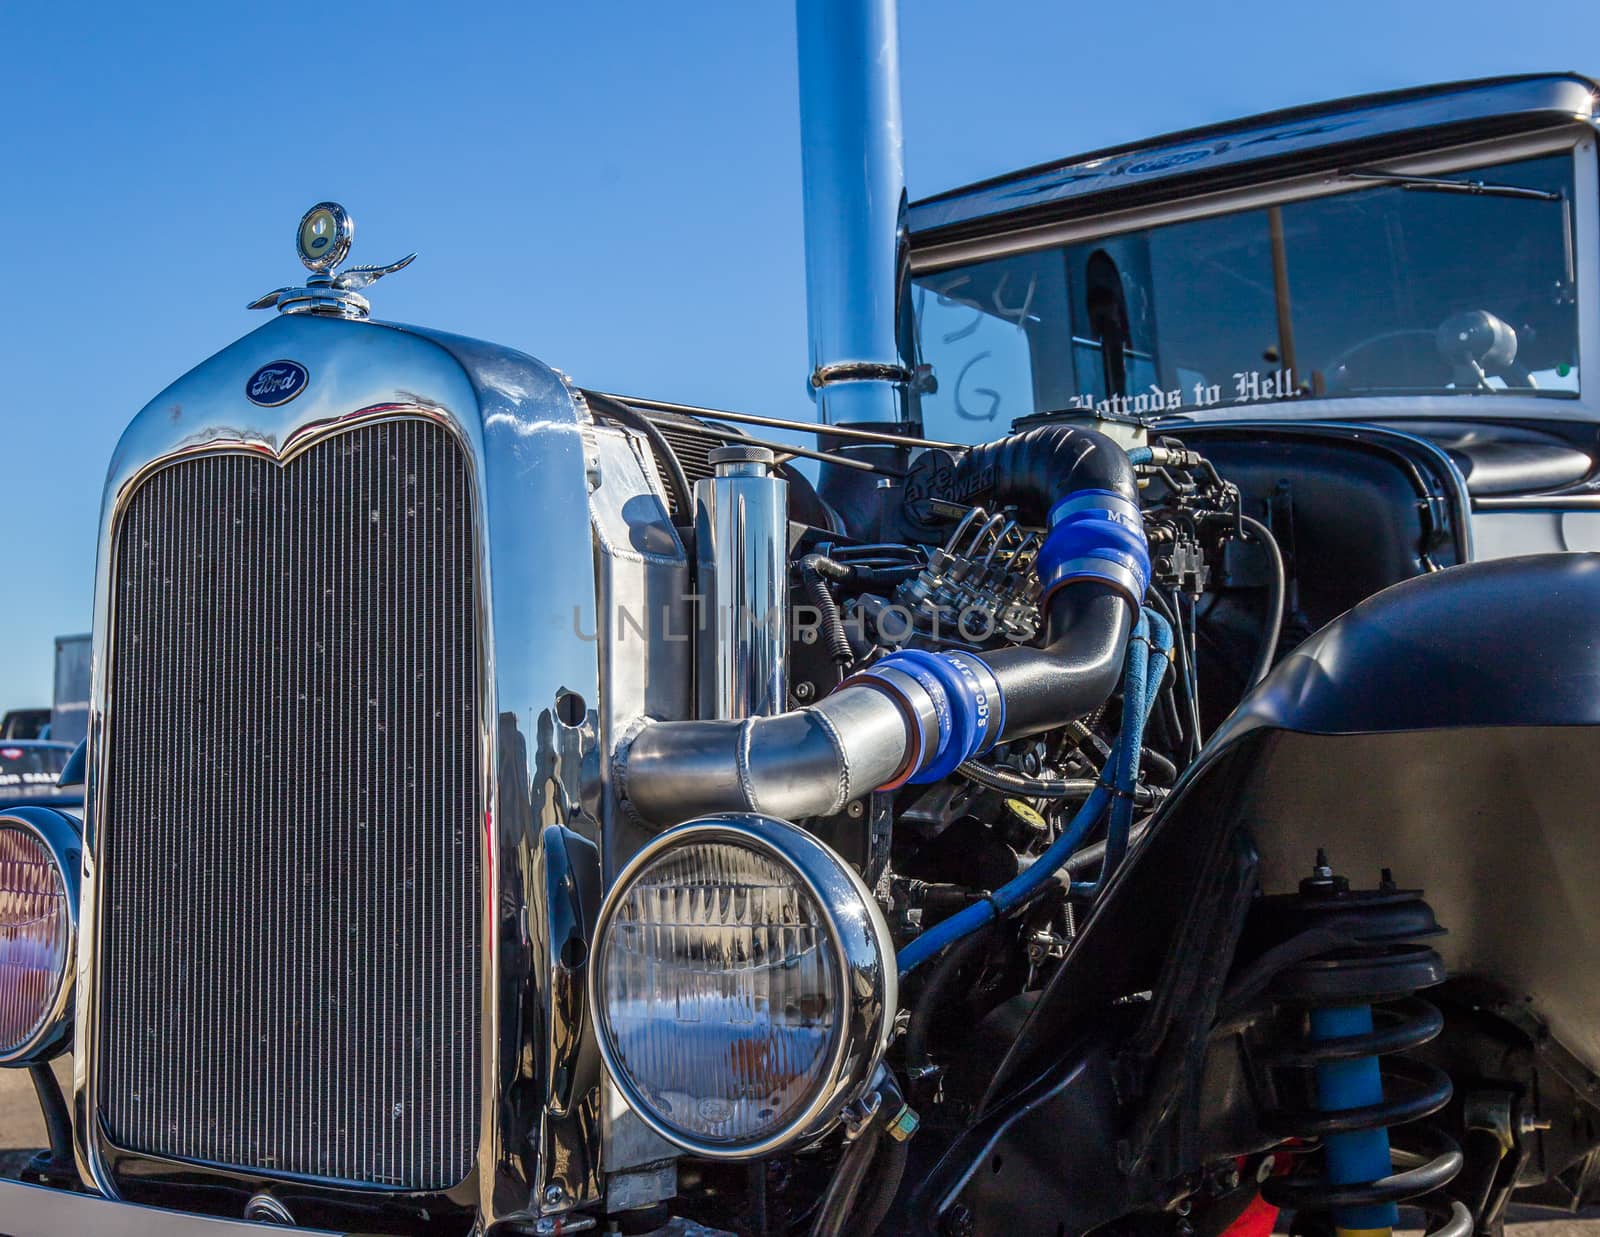 Redding, California, USA- February 13, 2016: A Ford hot rod's engine is on display for the crowd at the Redding Drags in northern California.